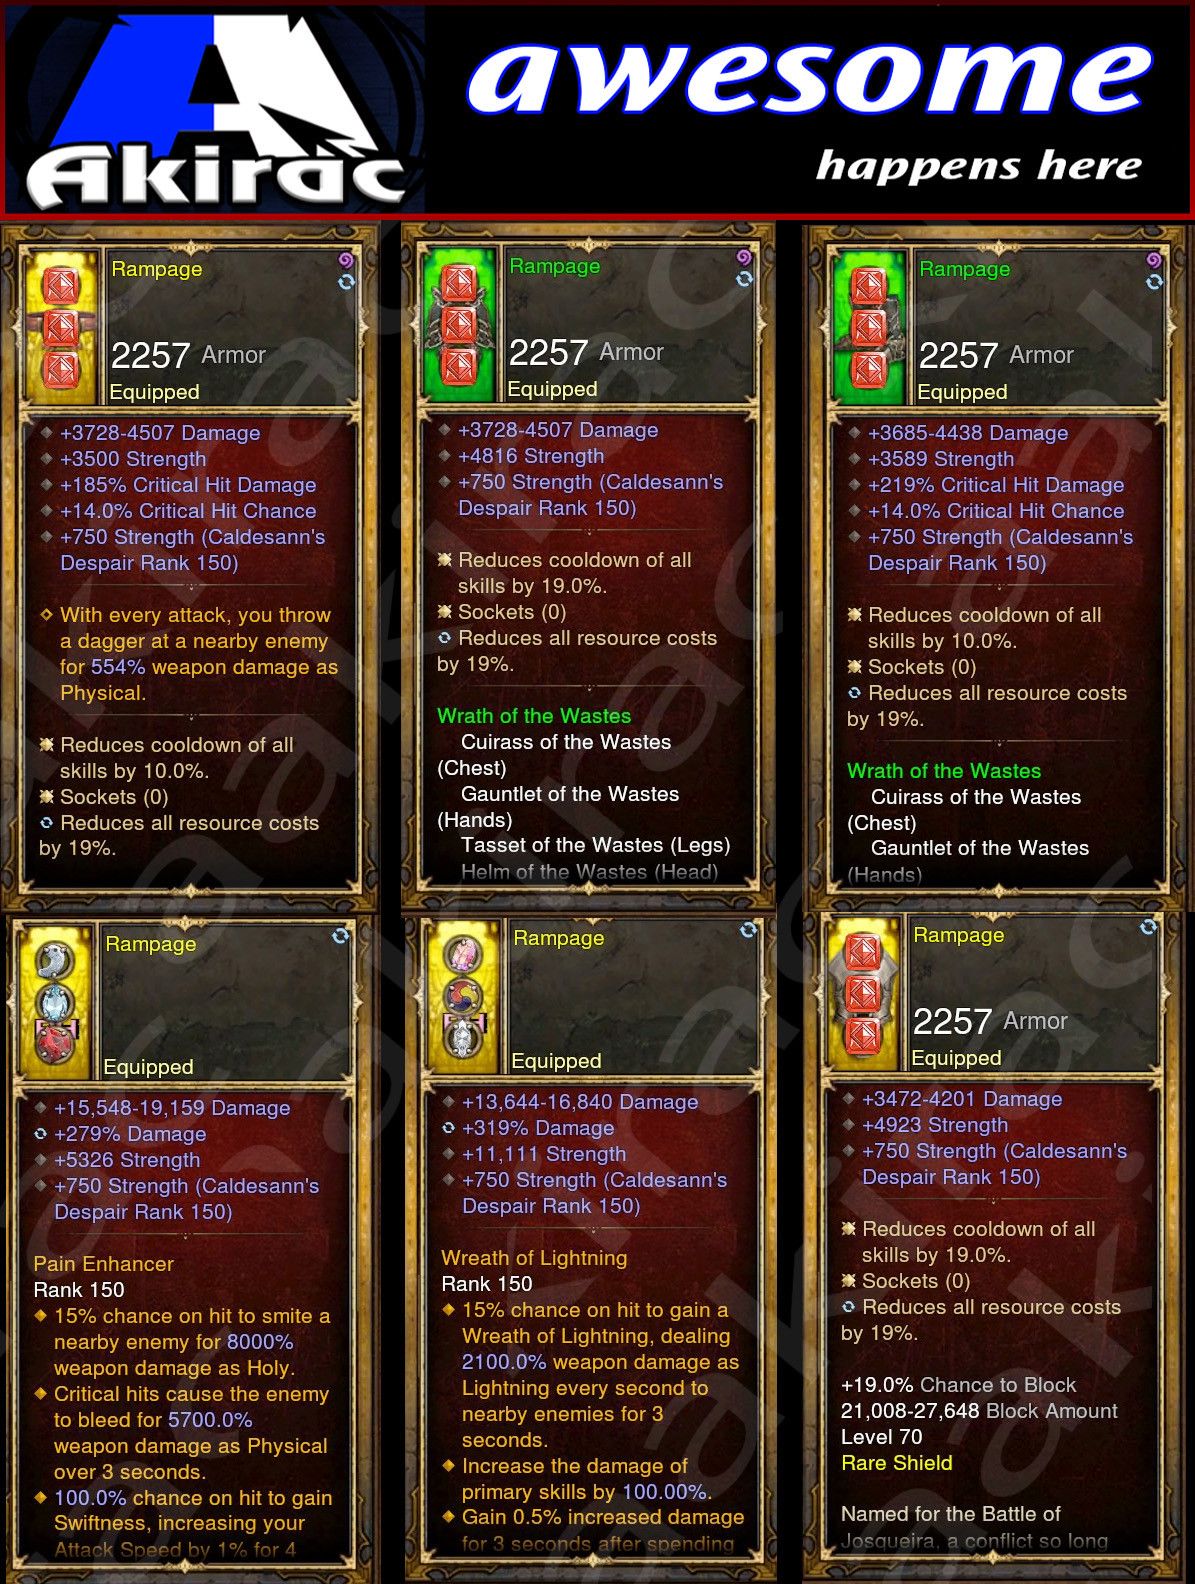 Diablo 3 Immortal v1 Waste Barbarian Modded Set for Rift 150 Rampage Diablo 3 Mods ROS Seasonal and Non Seasonal Save Mod - Modded Items and Gear - Hacks - Cheats - Trainers for Playstation 4 - Playstation 5 - Nintendo Switch - Xbox One